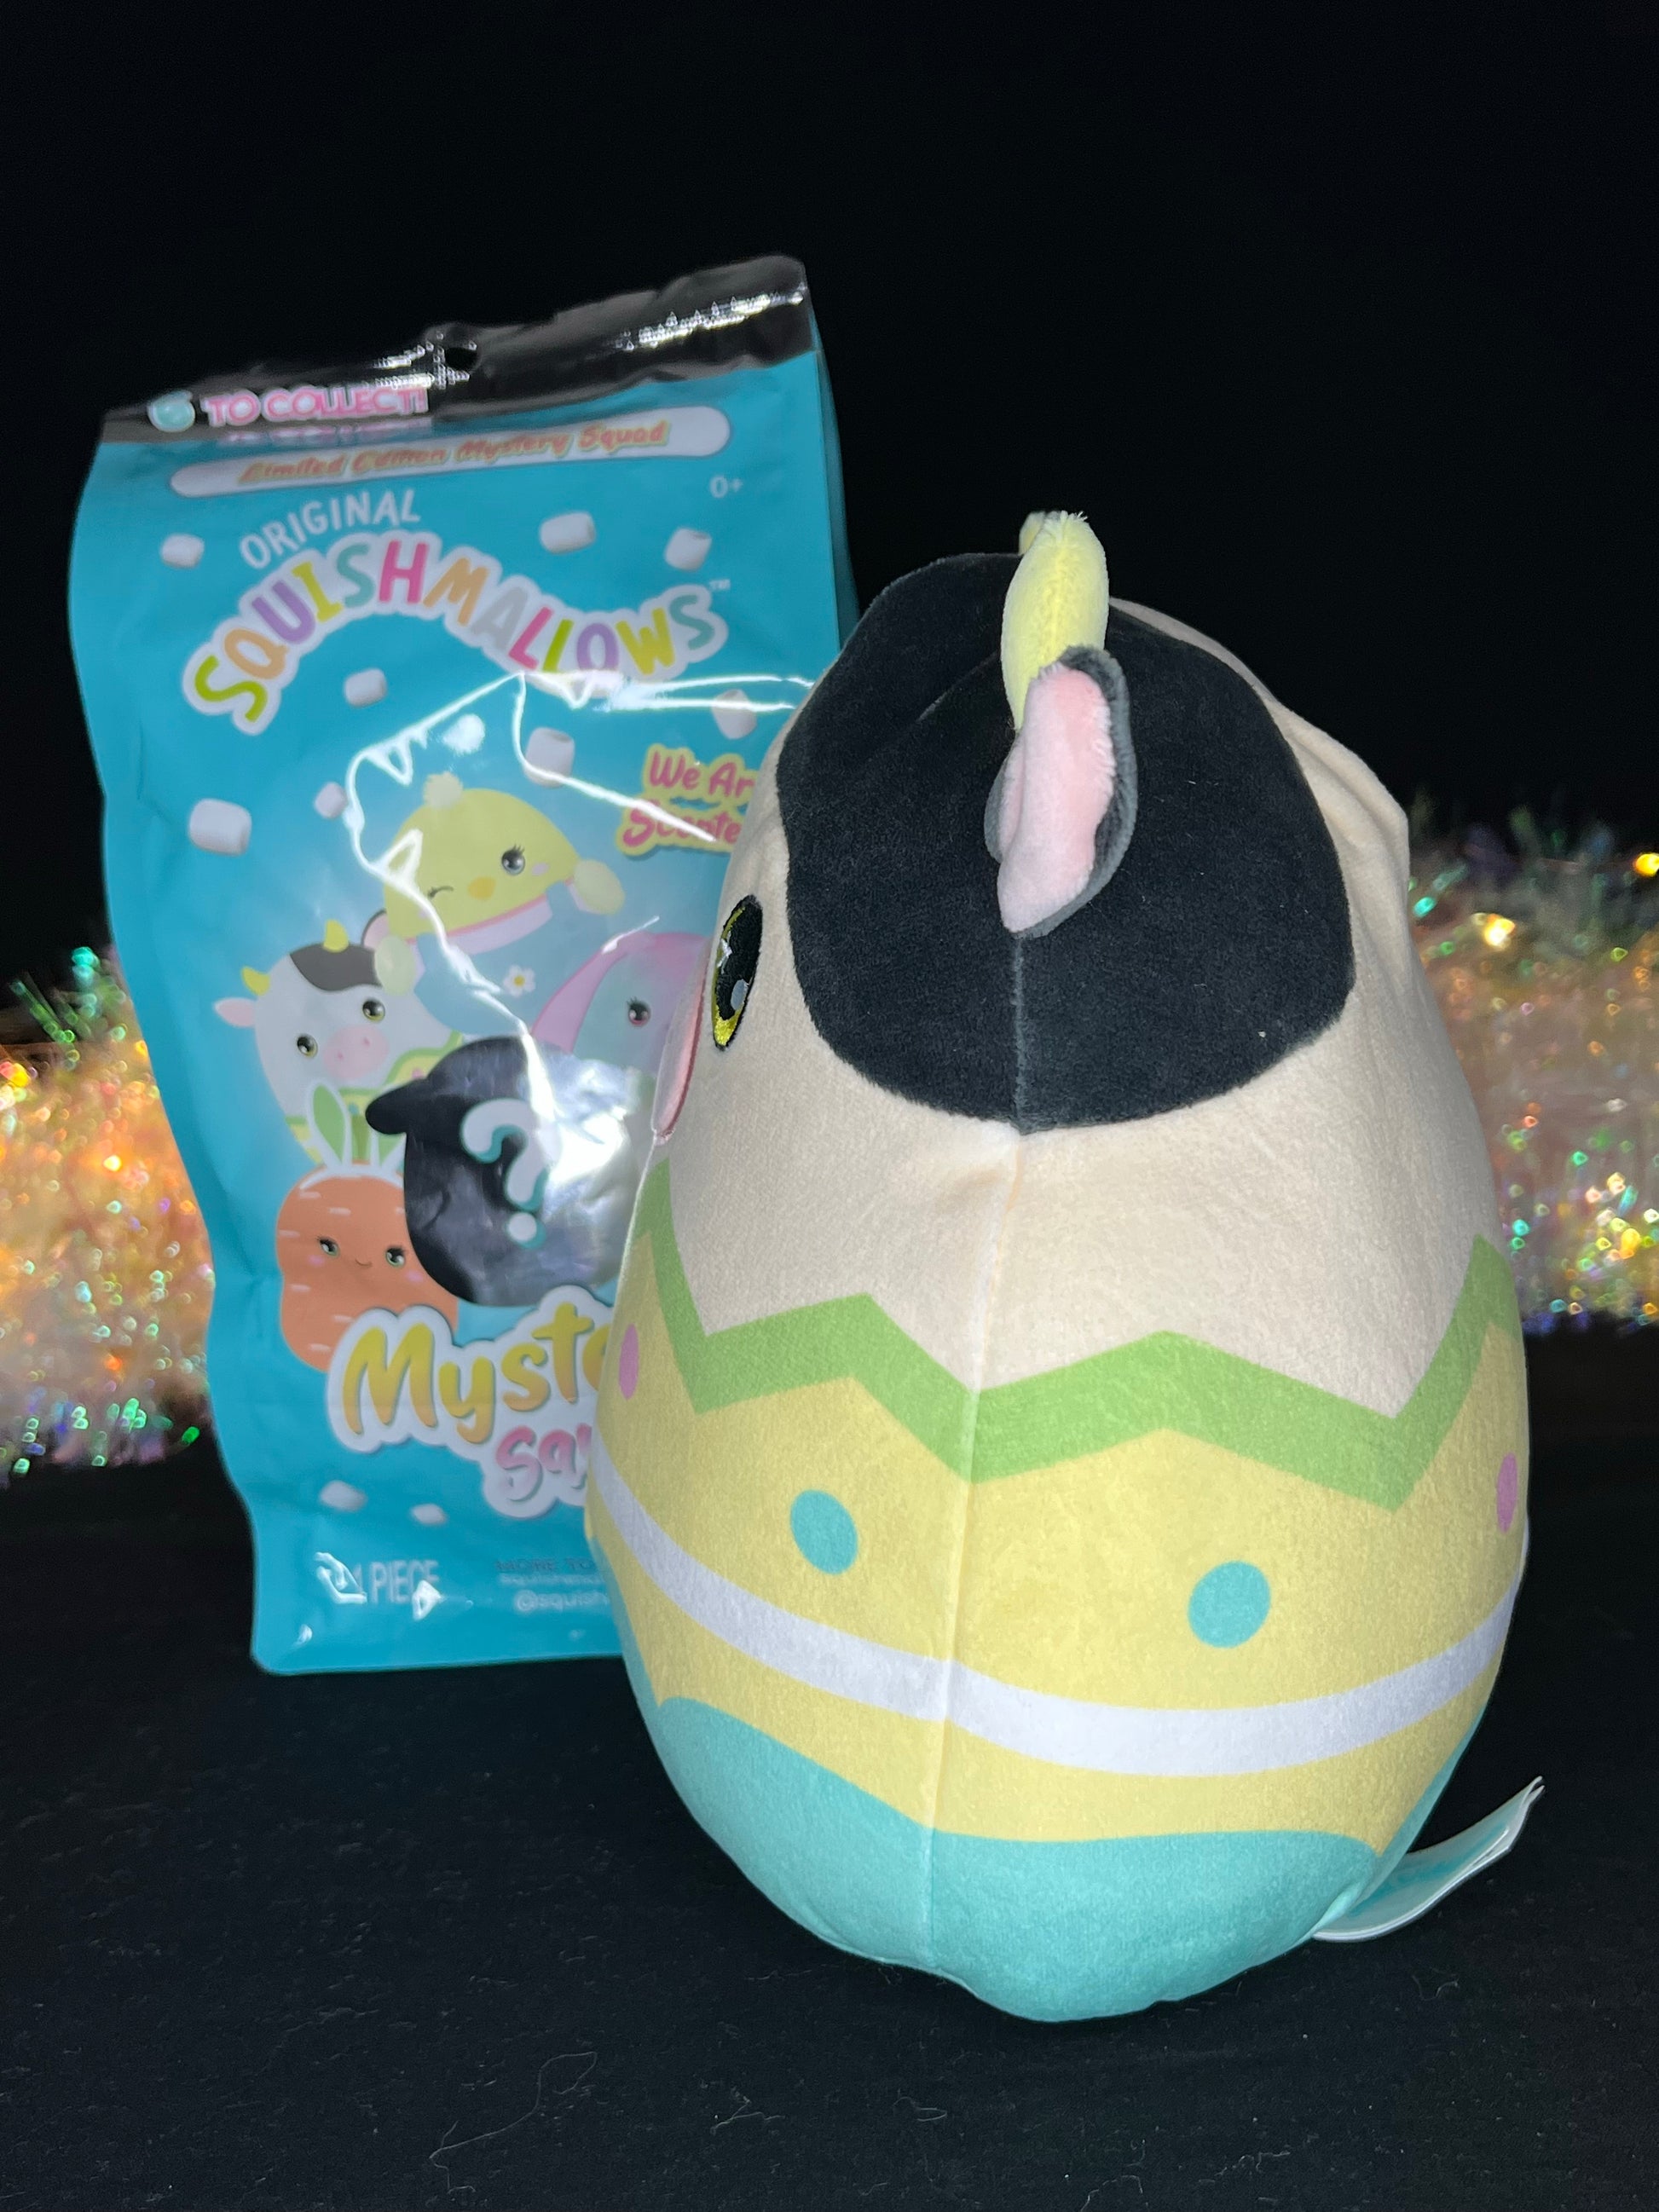 Squishmallow 8” Easter Mystery Squad Scented Cow.